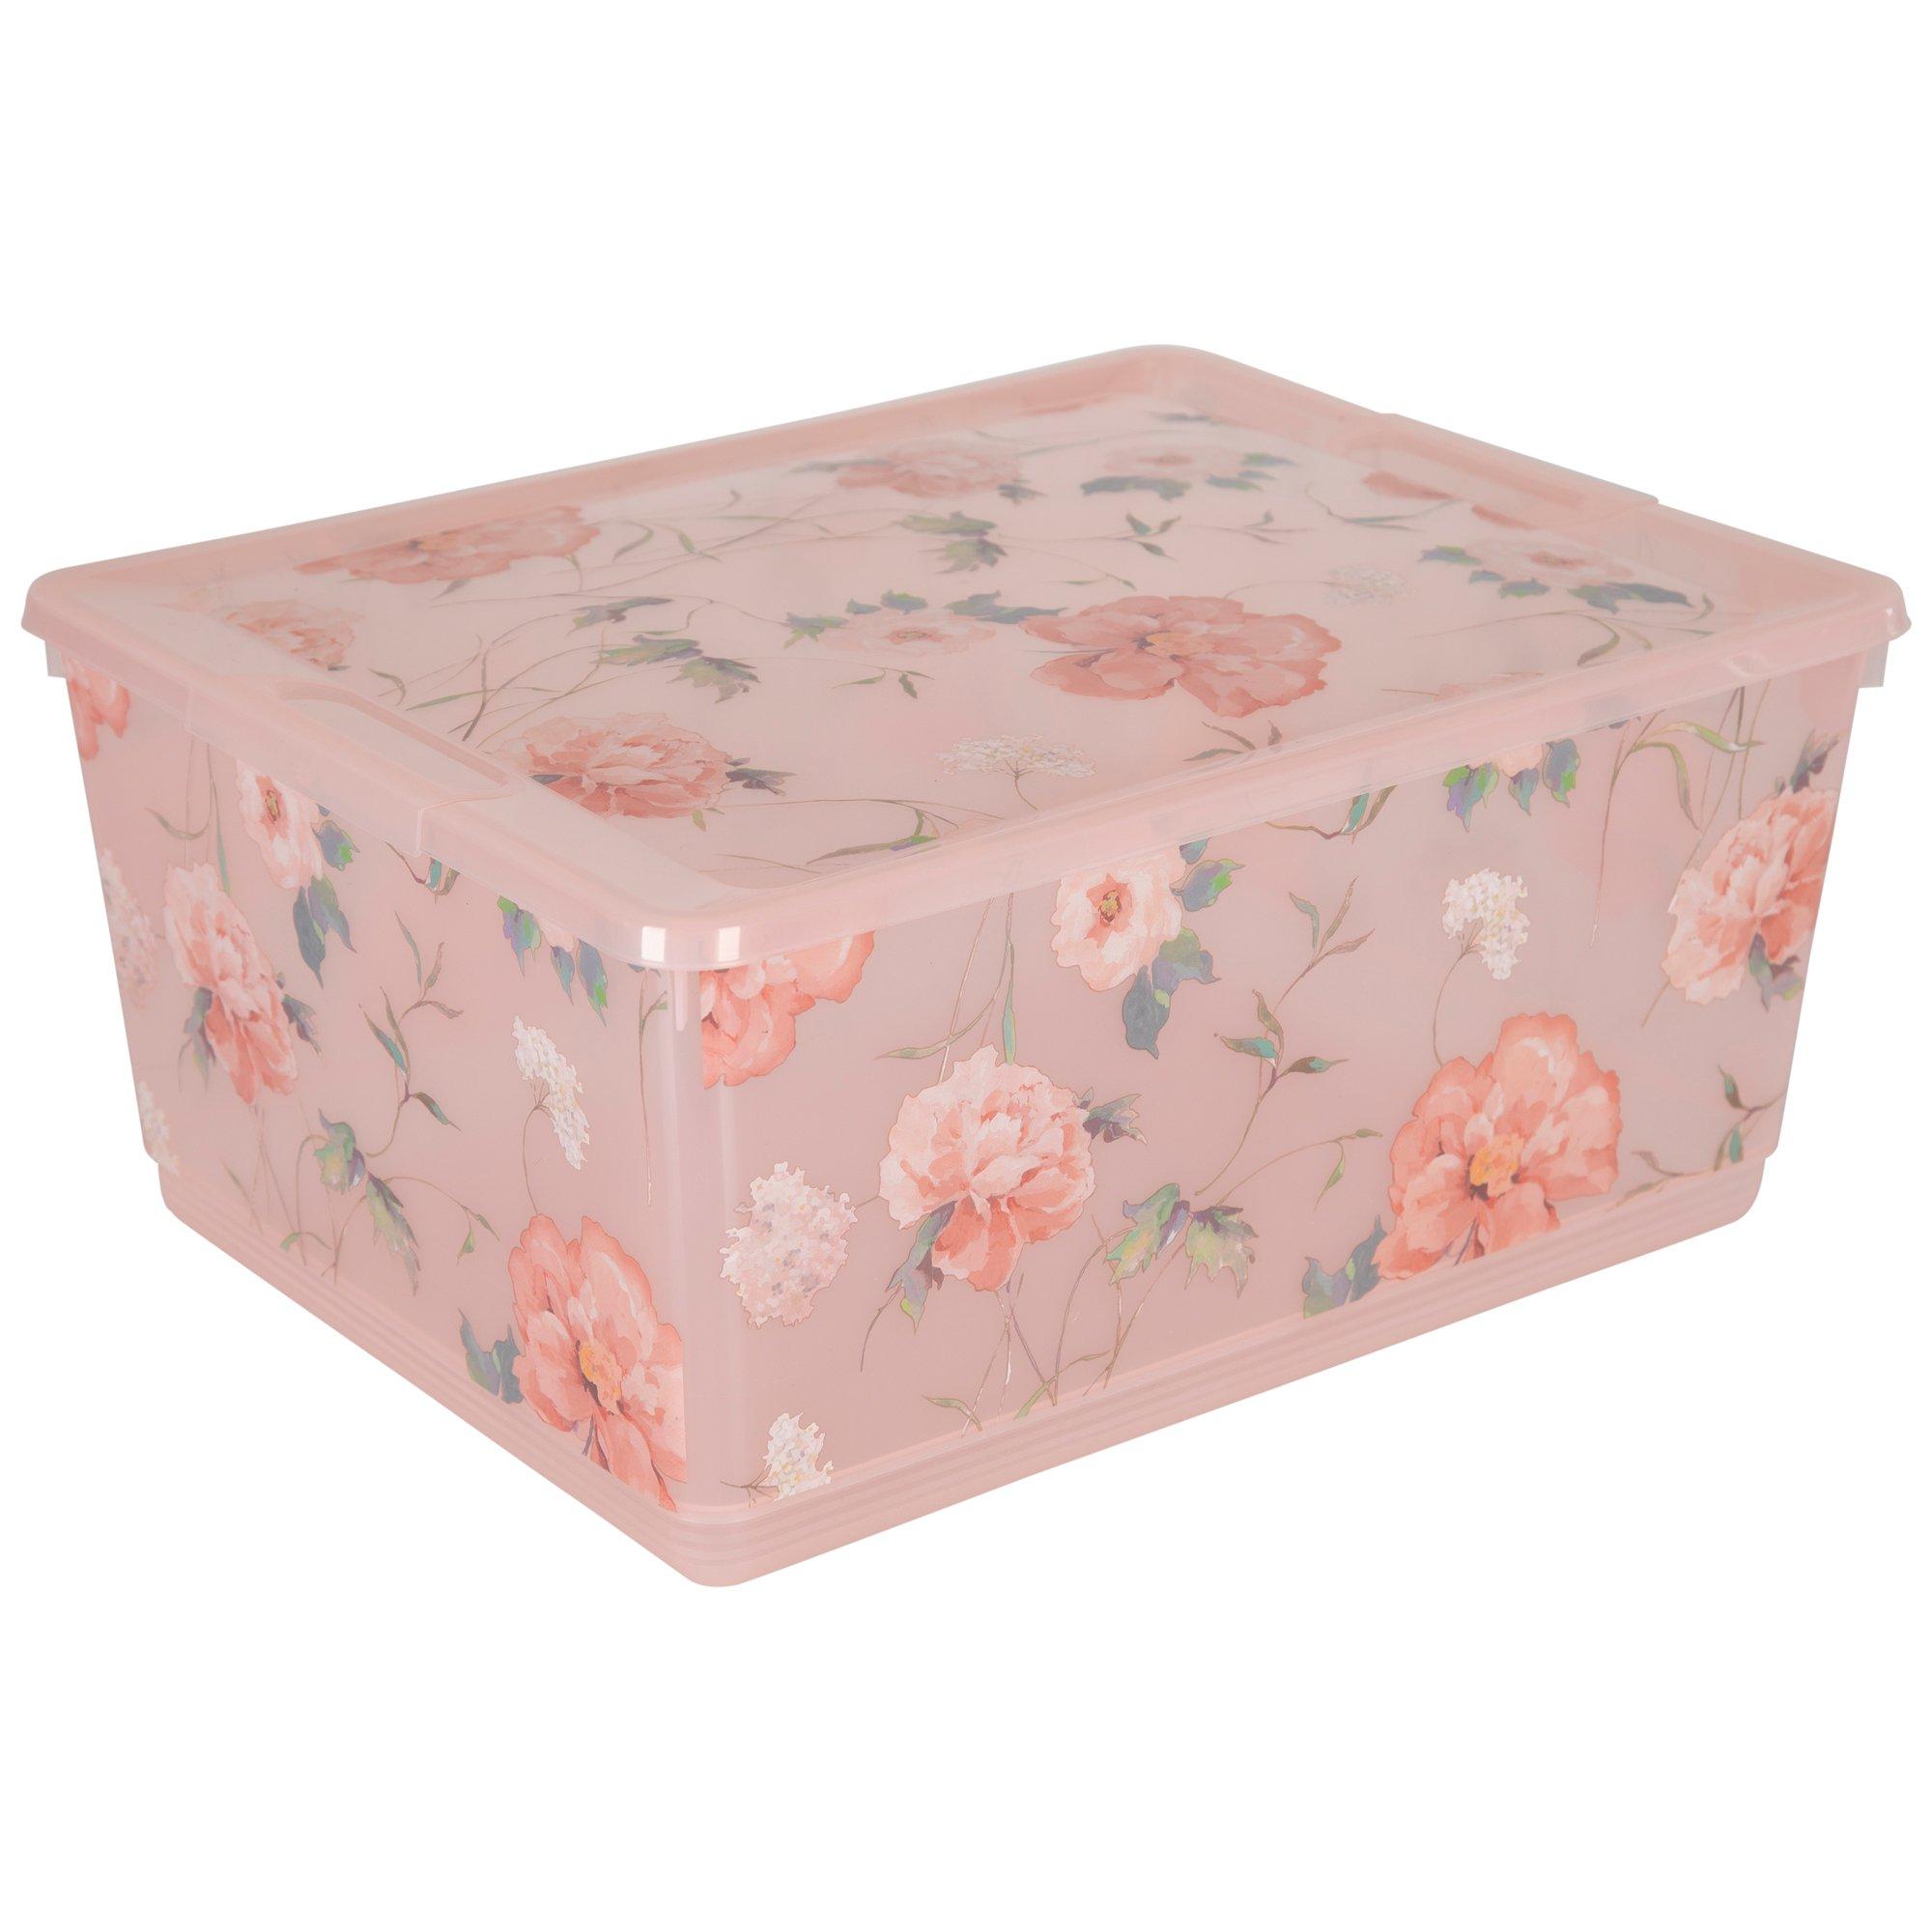 Pink Floral Container, Hobby Lobby